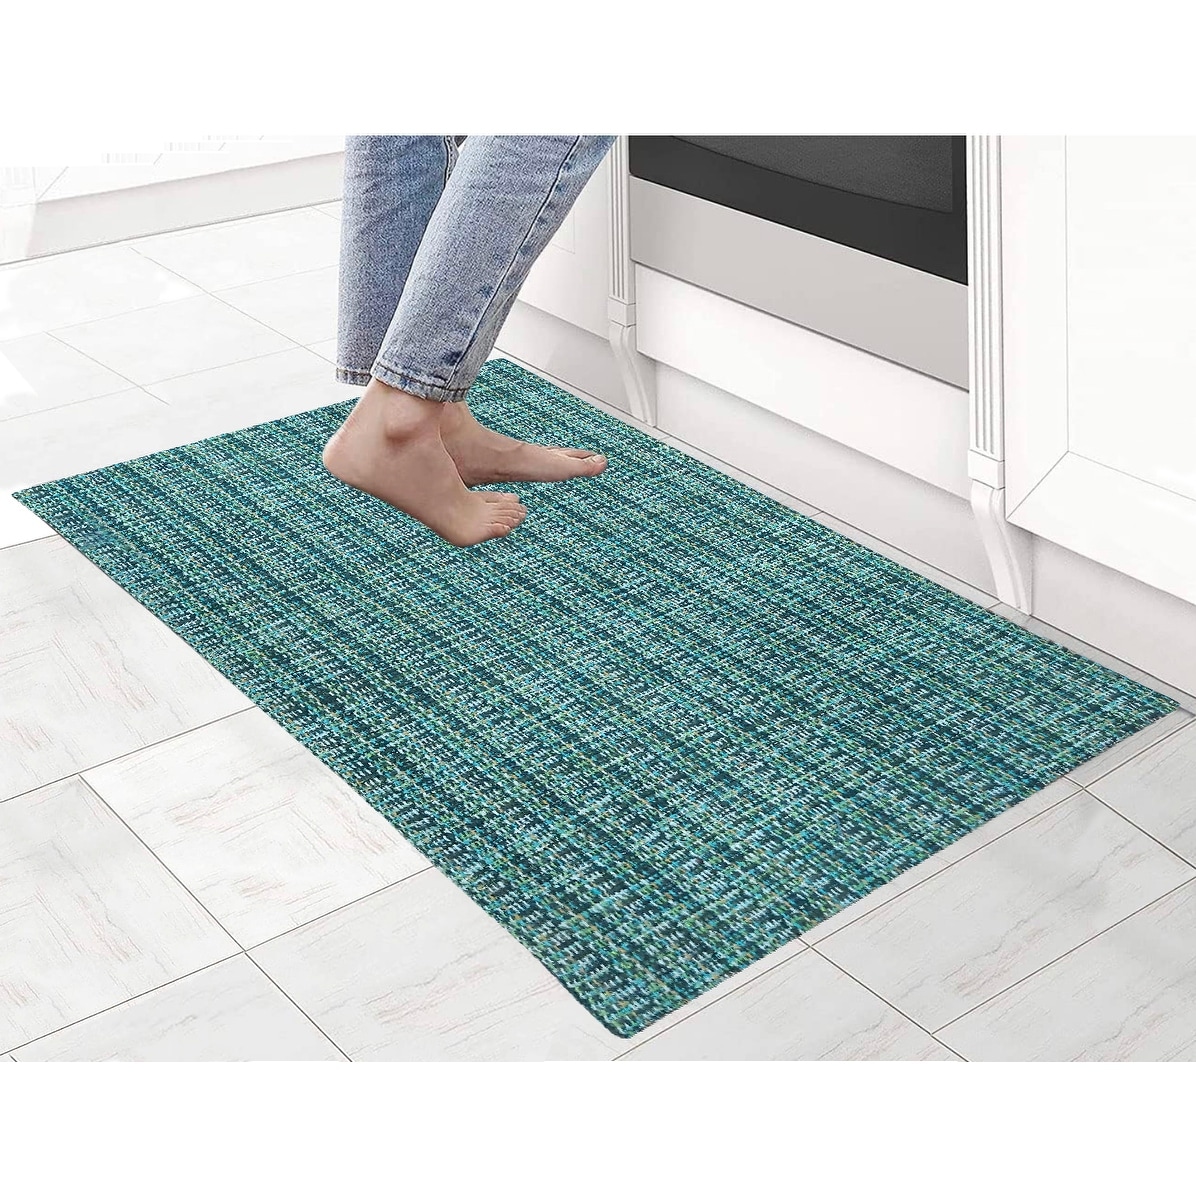 https://ak1.ostkcdn.com/images/products/is/images/direct/5638af6ea2c31016adf1edab198460dc47211a50/Woven-Cotton-Anti-Fatigue-Cushioned-Kitchen-%7C-Doormat-%7C-Bathroom-18%22-x-30%22-Mats-With-Foam-Backing-Anti-Slip.jpg